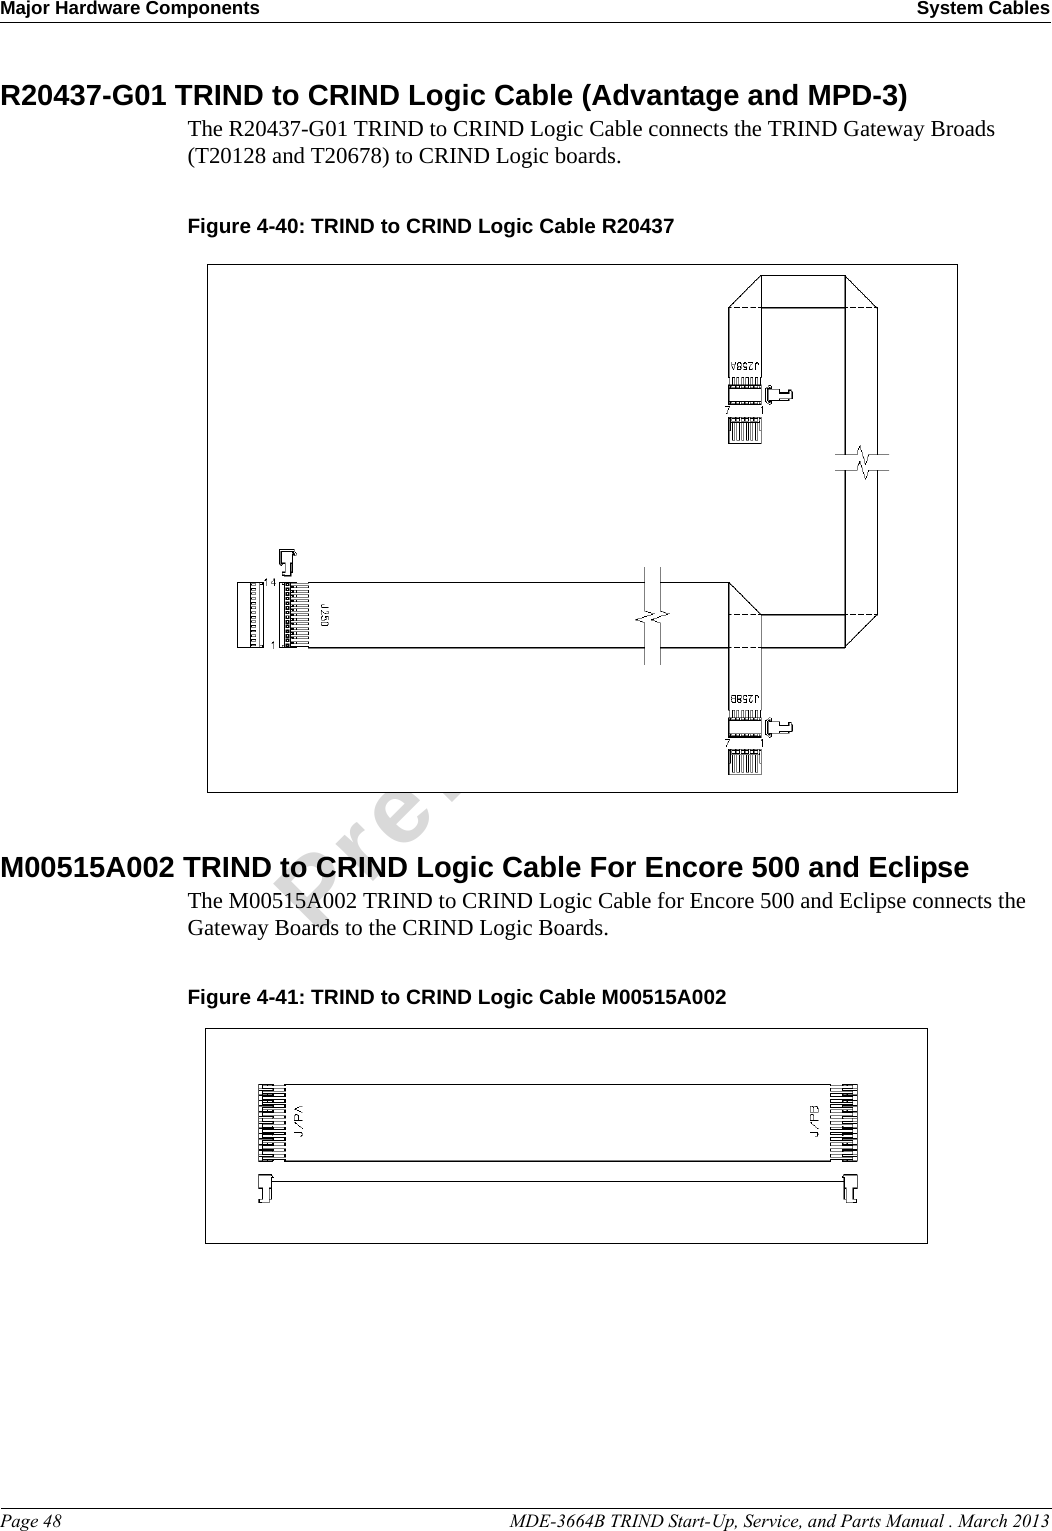 Major Hardware Components System CablesPage 48                                                                                                  MDE-3664B TRIND Start-Up, Service, and Parts Manual . March 2013PreliminaryR20437-G01 TRIND to CRIND Logic Cable (Advantage and MPD-3)The R20437-G01 TRIND to CRIND Logic Cable connects the TRIND Gateway Broads (T20128 and T20678) to CRIND Logic boards.Figure 4-40: TRIND to CRIND Logic Cable R20437M00515A002 TRIND to CRIND Logic Cable For Encore 500 and EclipseThe M00515A002 TRIND to CRIND Logic Cable for Encore 500 and Eclipse connects the Gateway Boards to the CRIND Logic Boards.Figure 4-41: TRIND to CRIND Logic Cable M00515A002  